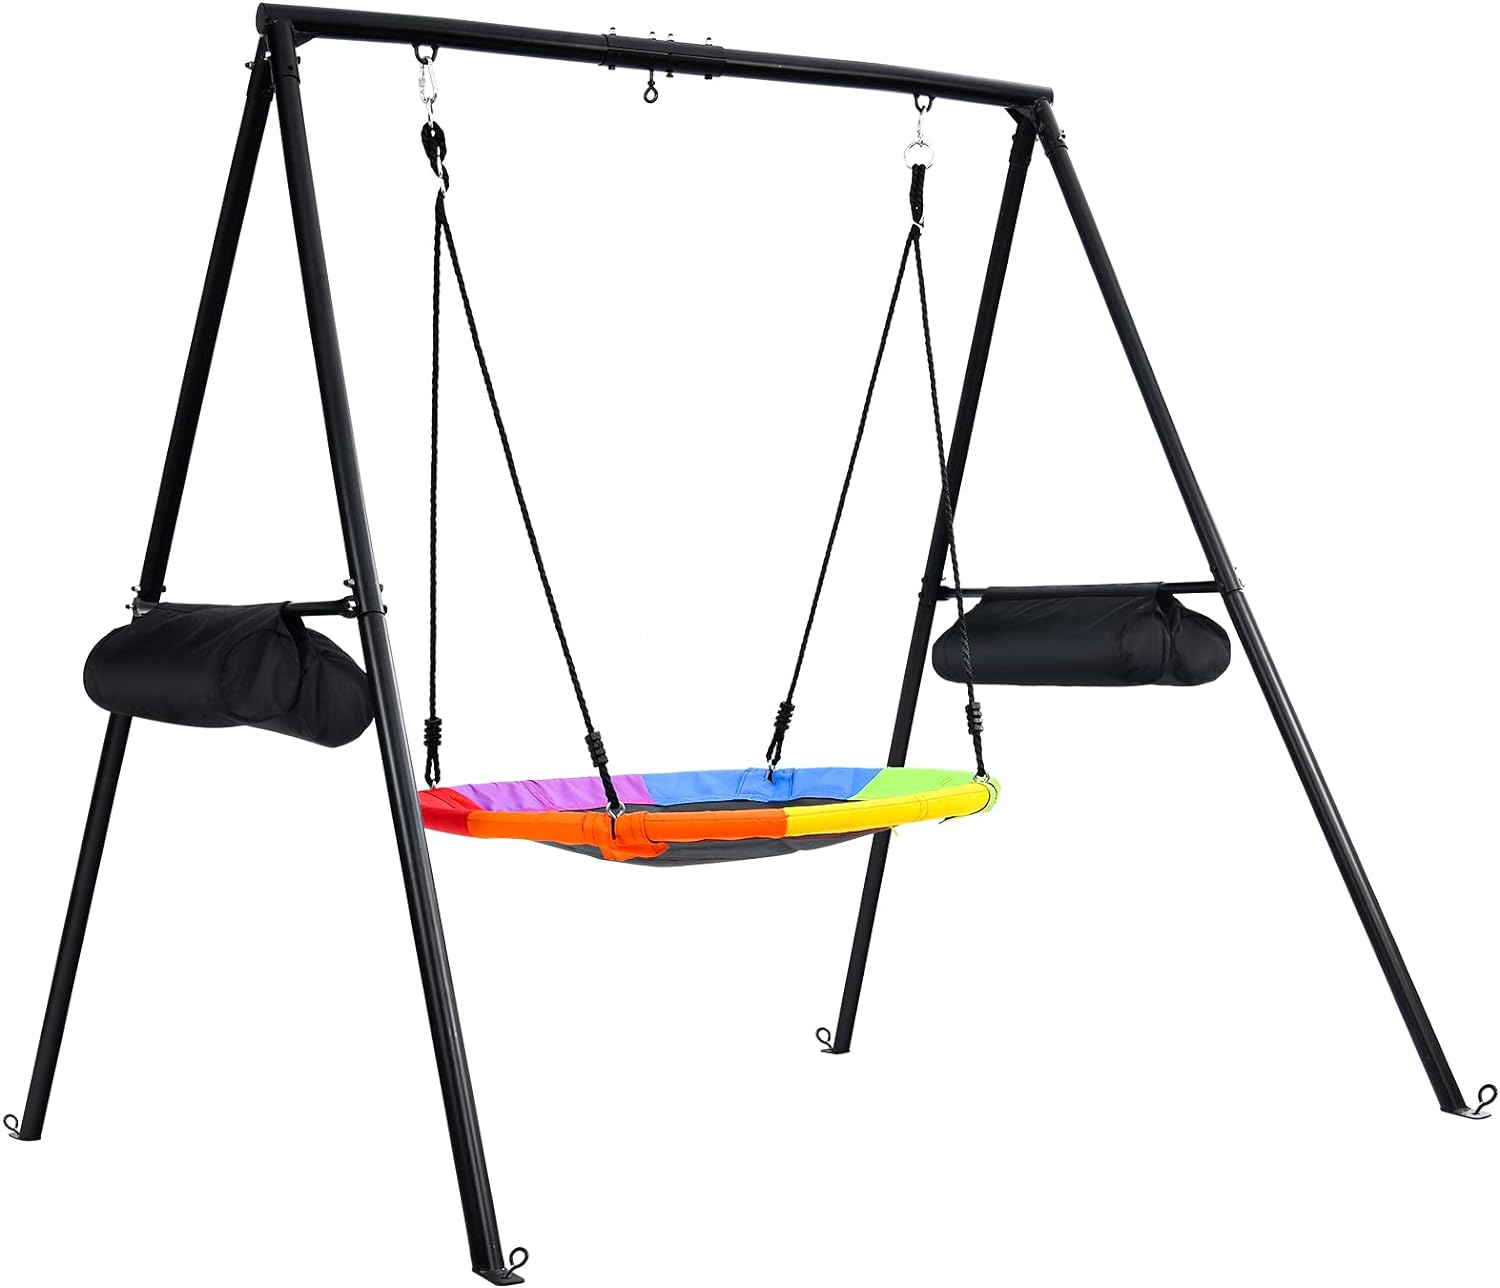 Trekassy 440lbs Swing Set for Backyard with 40 Inch Saucer Tree Swing and A-Frame Metal Swing Stand-Rainbow